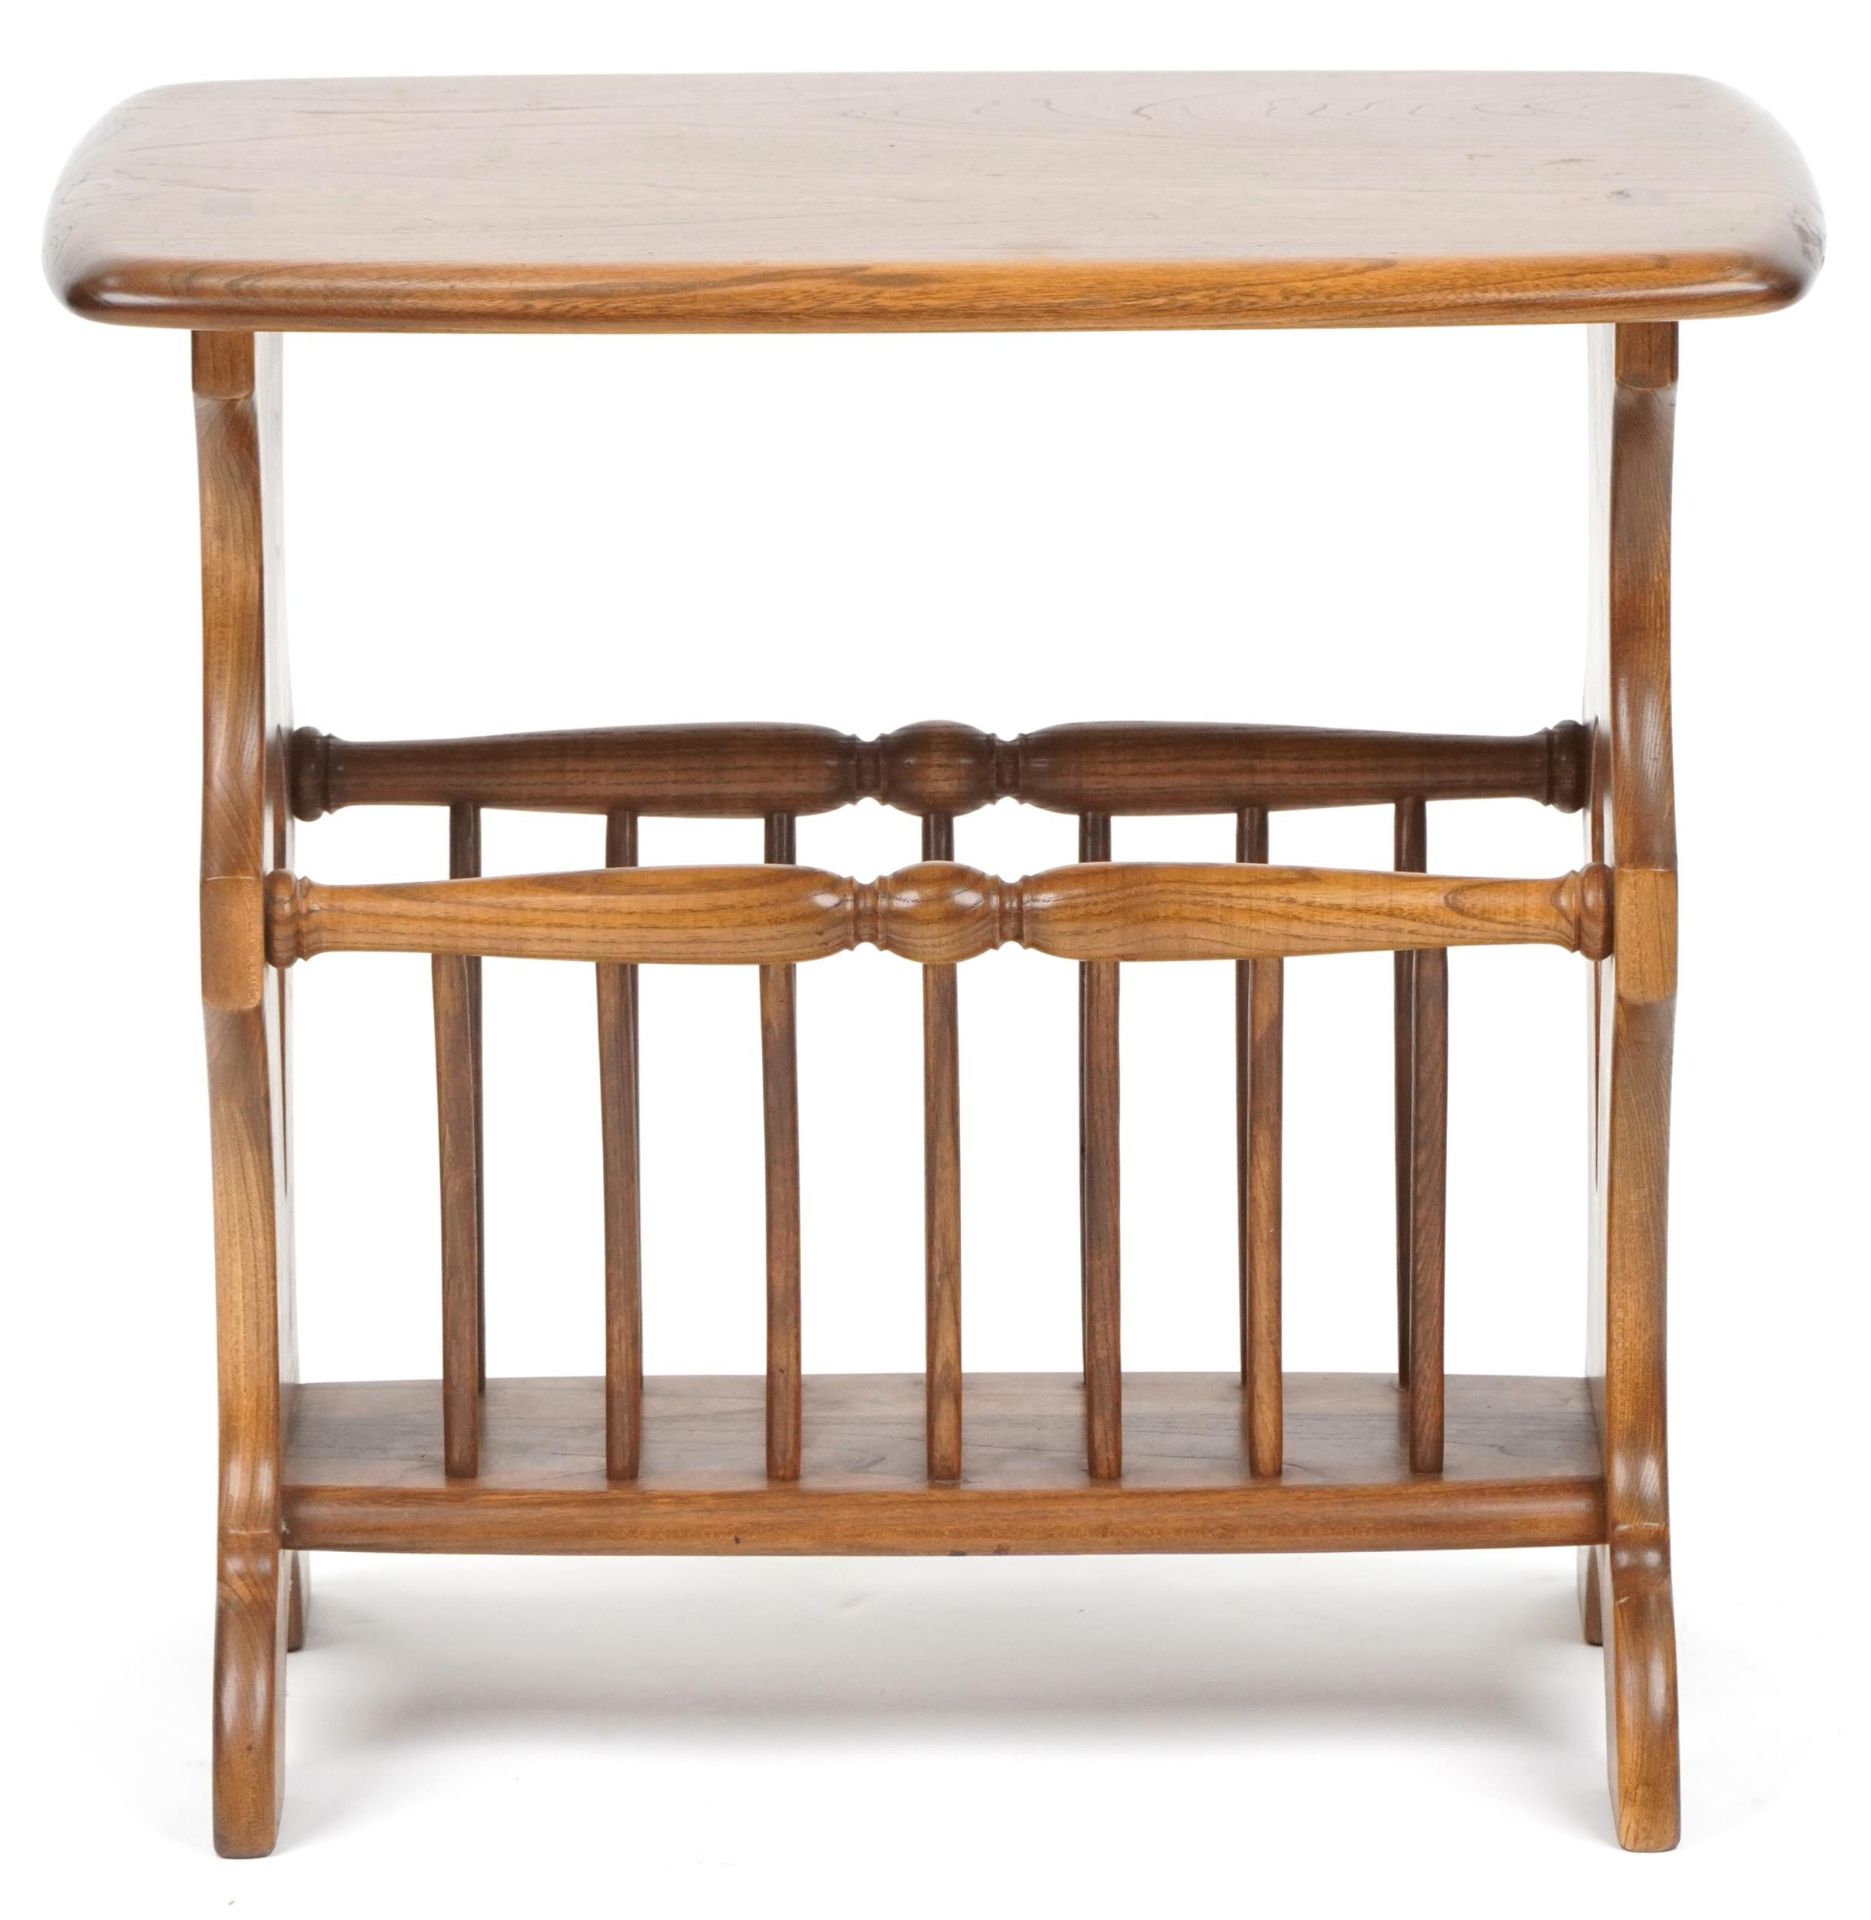 Ercol elm occasional table with magazine rack, 50cm H x 54cm W x 36cm D - Image 4 of 5